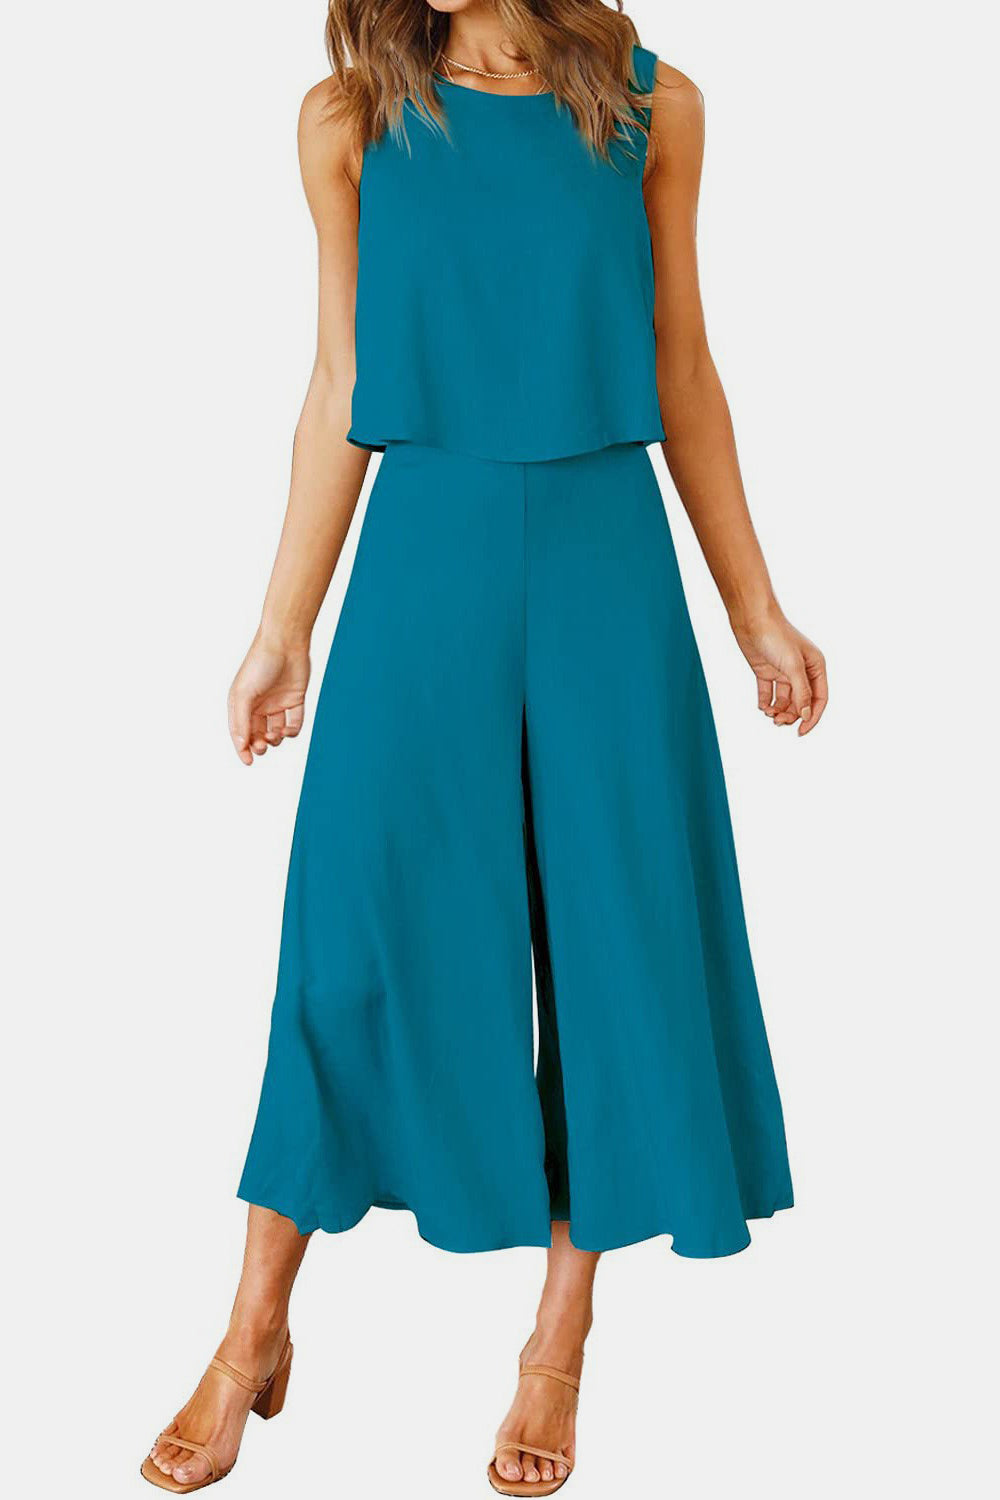 Sky Blue Culottes Outfit